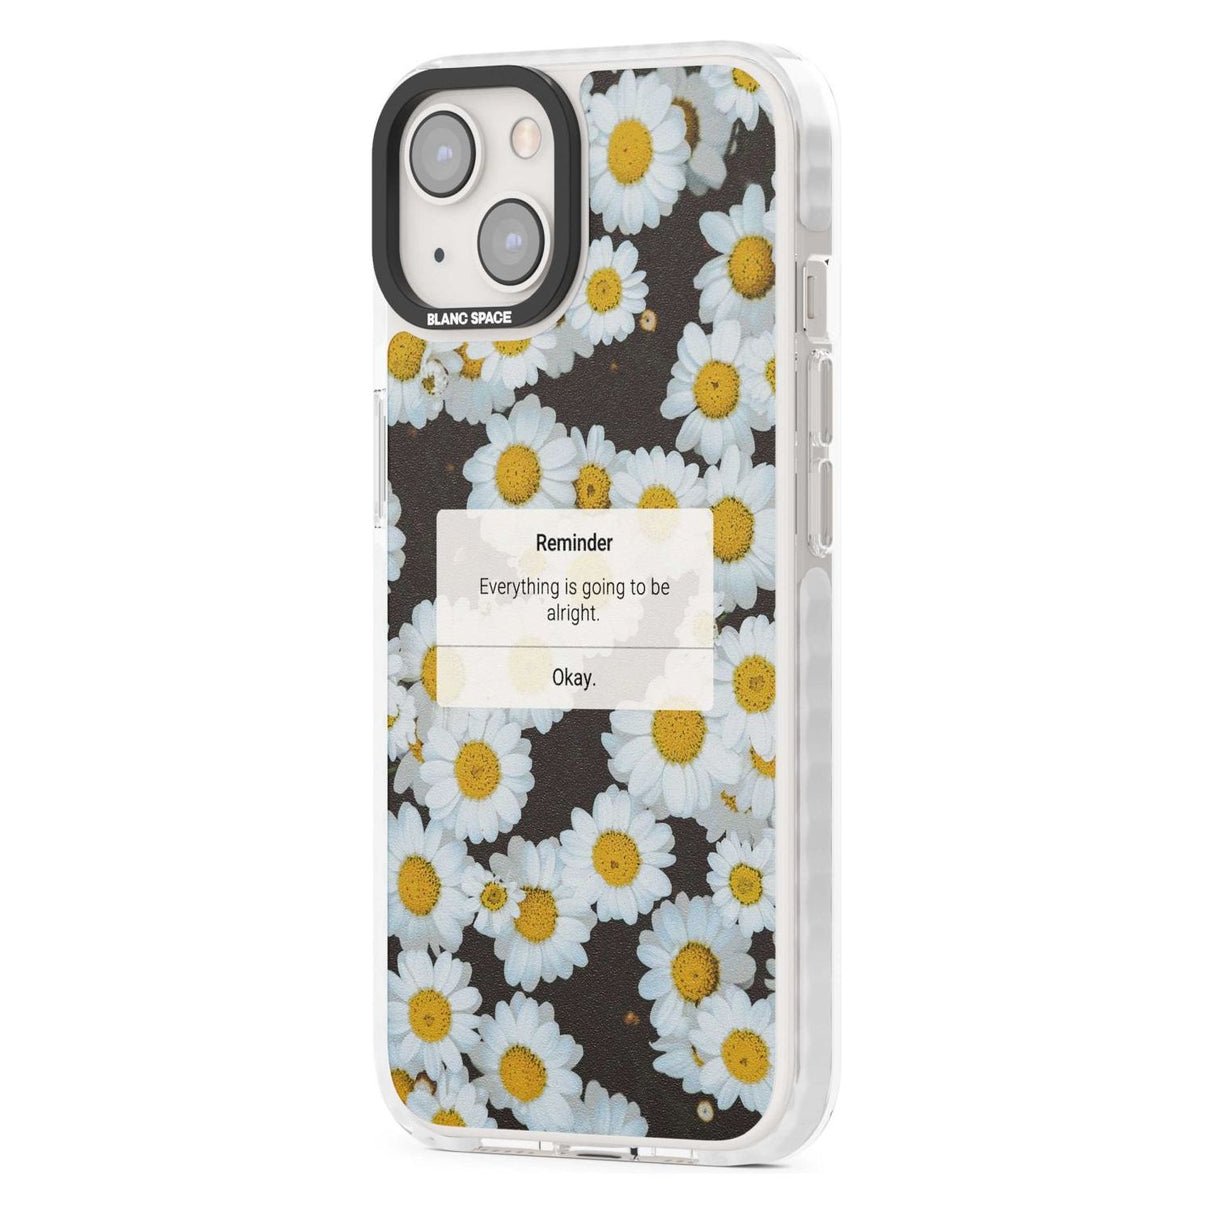 "Everything will be alright" iPhone Reminder Phone Case iPhone 15 Pro Max / Black Impact Case,iPhone 15 Plus / Black Impact Case,iPhone 15 Pro / Black Impact Case,iPhone 15 / Black Impact Case,iPhone 15 Pro Max / Impact Case,iPhone 15 Plus / Impact Case,iPhone 15 Pro / Impact Case,iPhone 15 / Impact Case,iPhone 15 Pro Max / Magsafe Black Impact Case,iPhone 15 Plus / Magsafe Black Impact Case,iPhone 15 Pro / Magsafe Black Impact Case,iPhone 15 / Magsafe Black Impact Case,iPhone 14 Pro Max / Black Impact Case